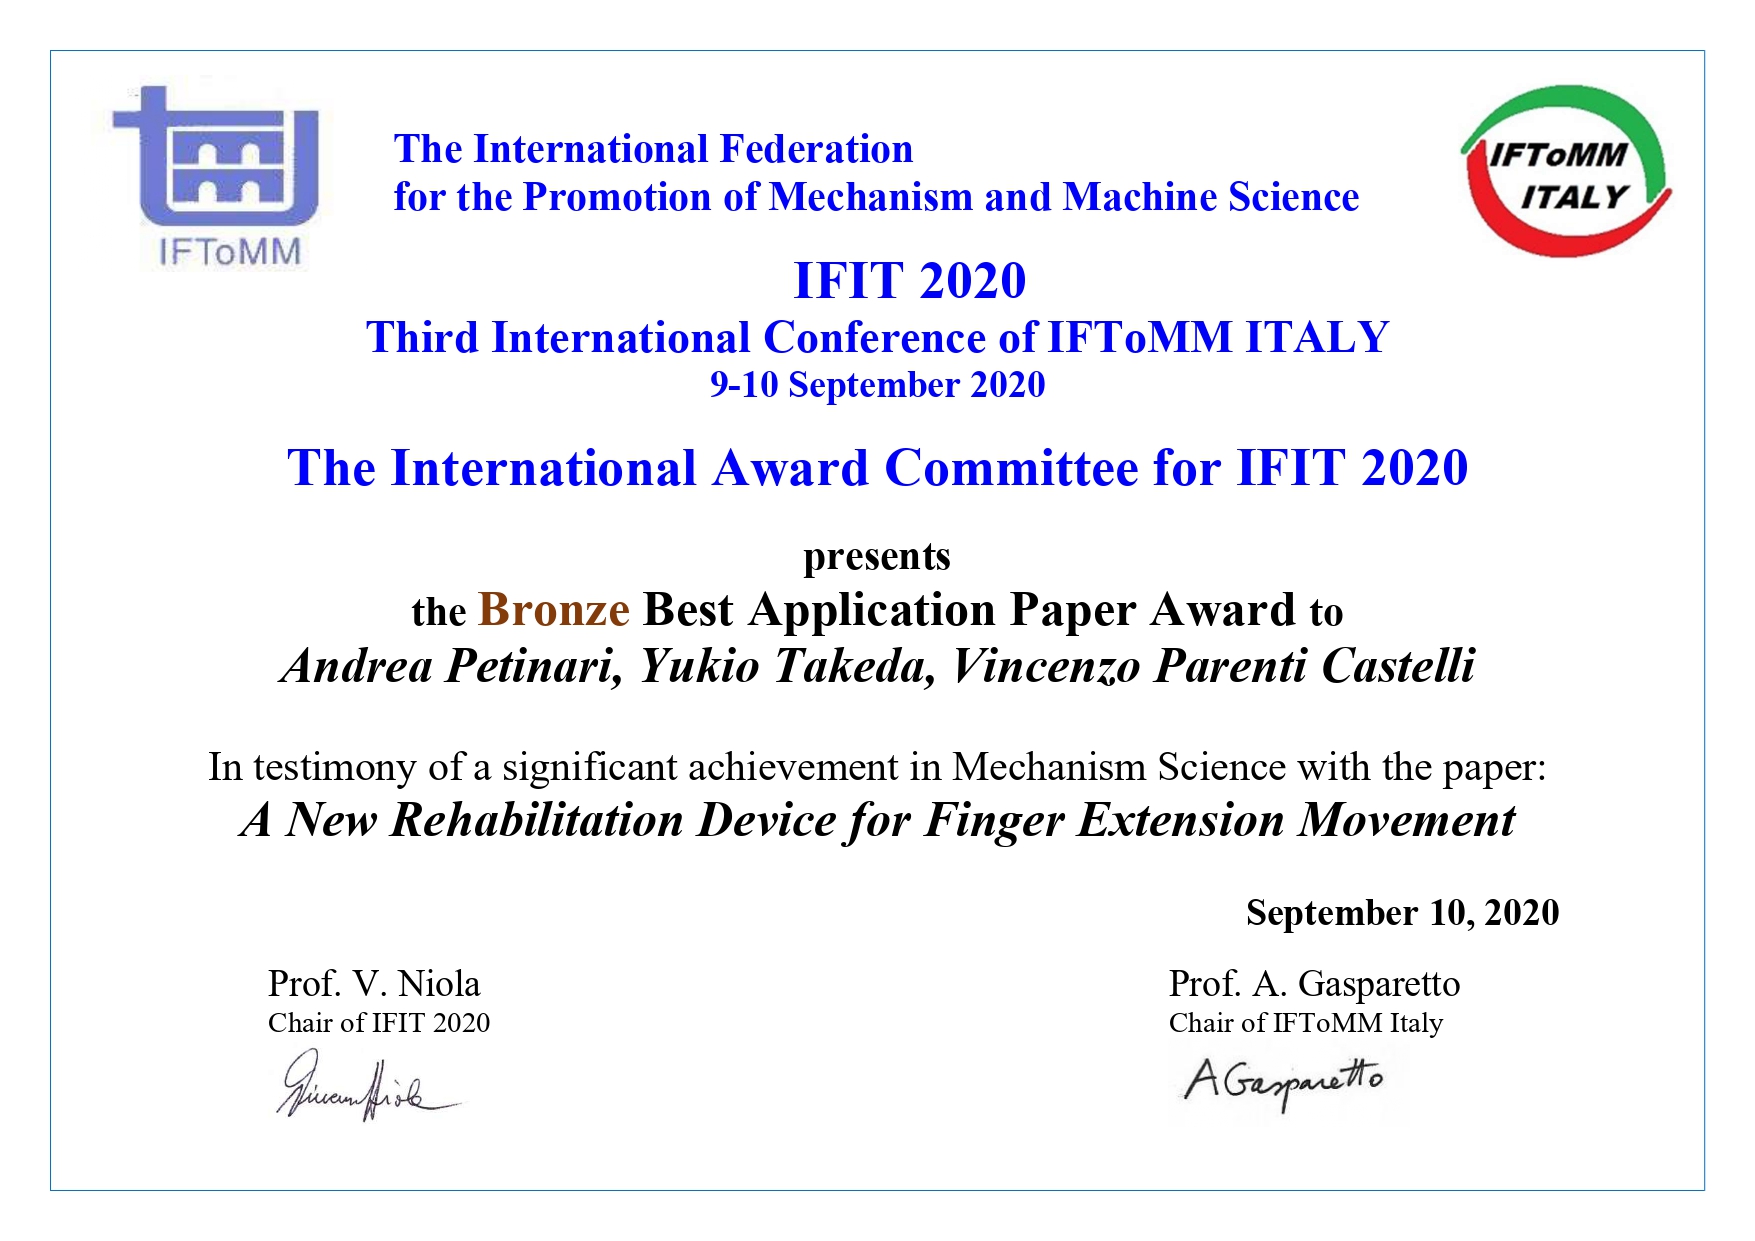 Takeda won the bronze in IFIT2020